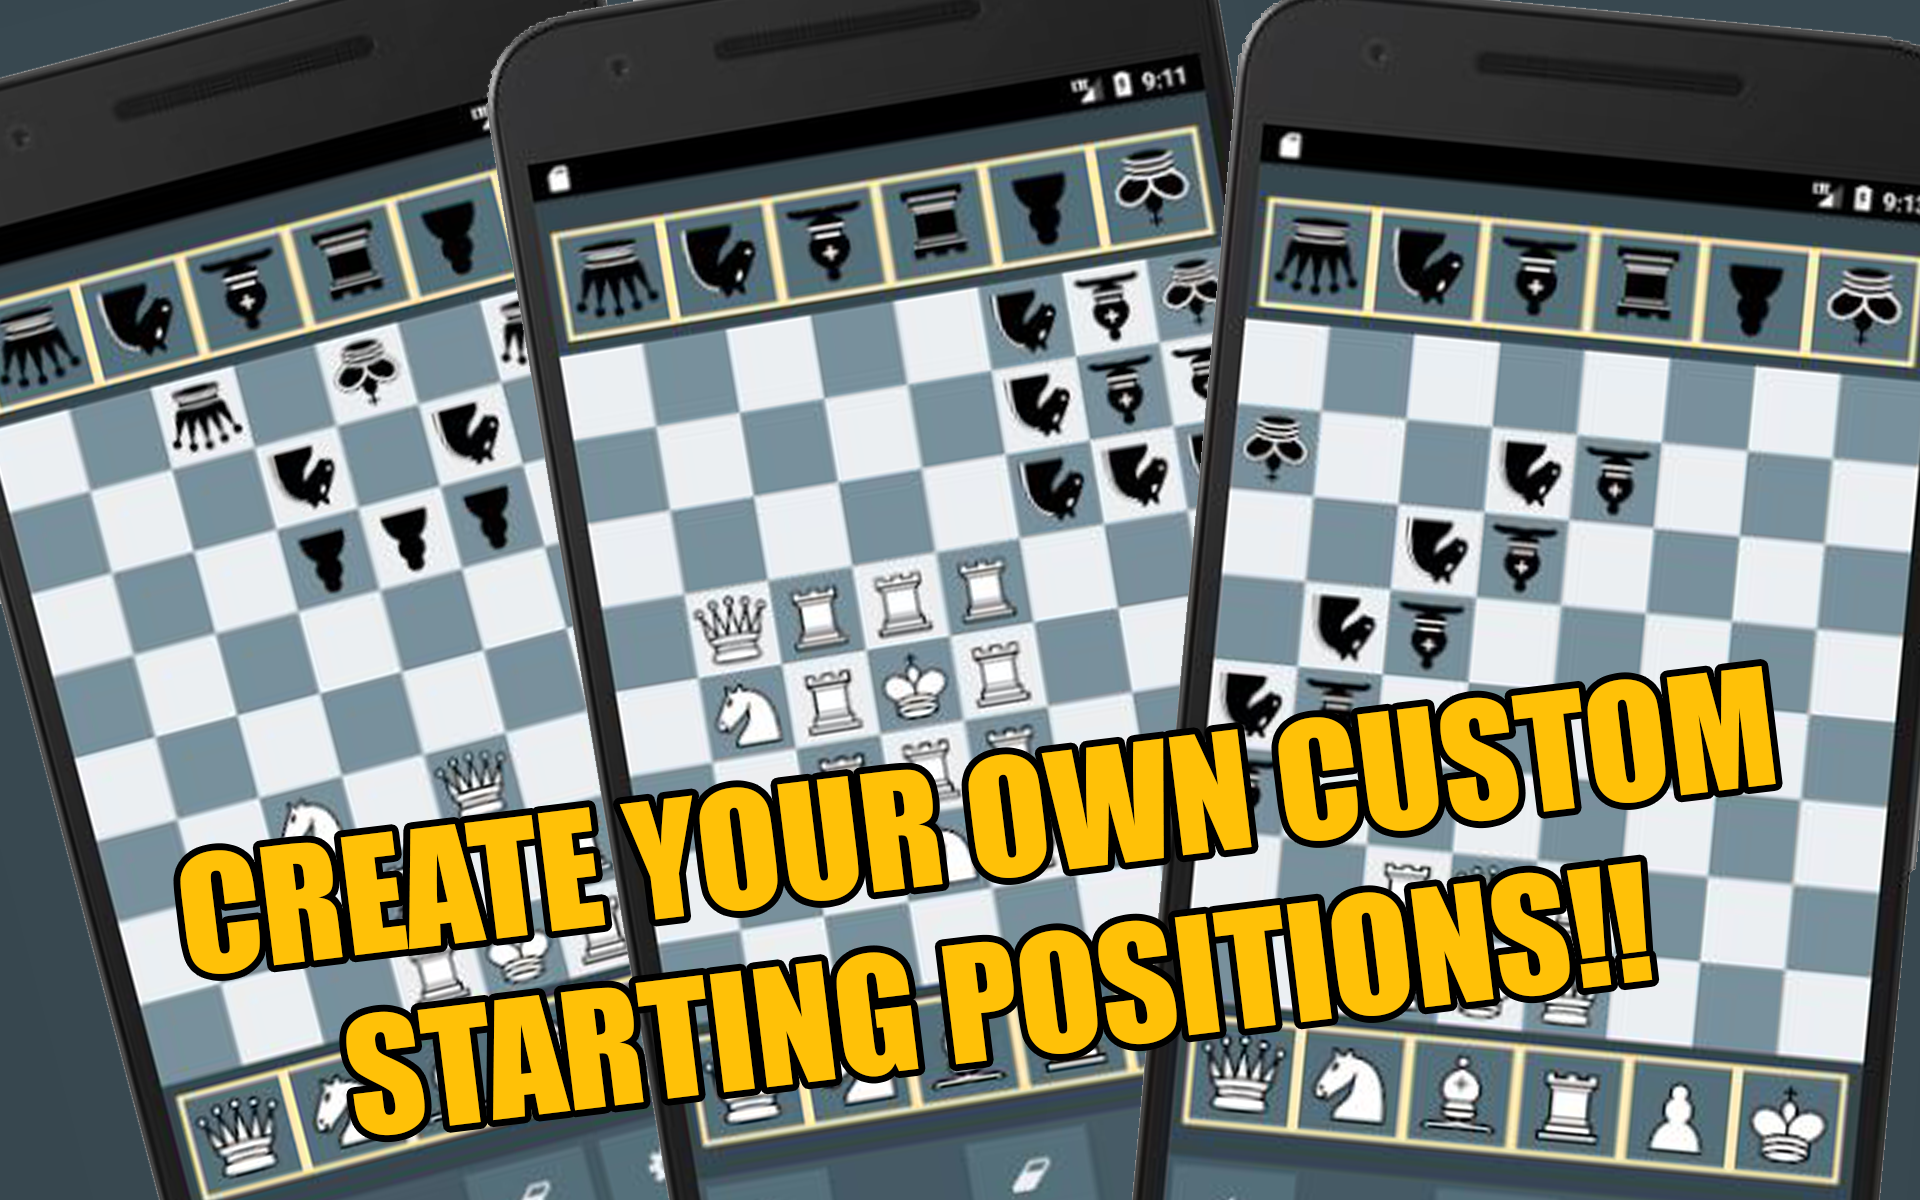 9 chess games for Android you can try